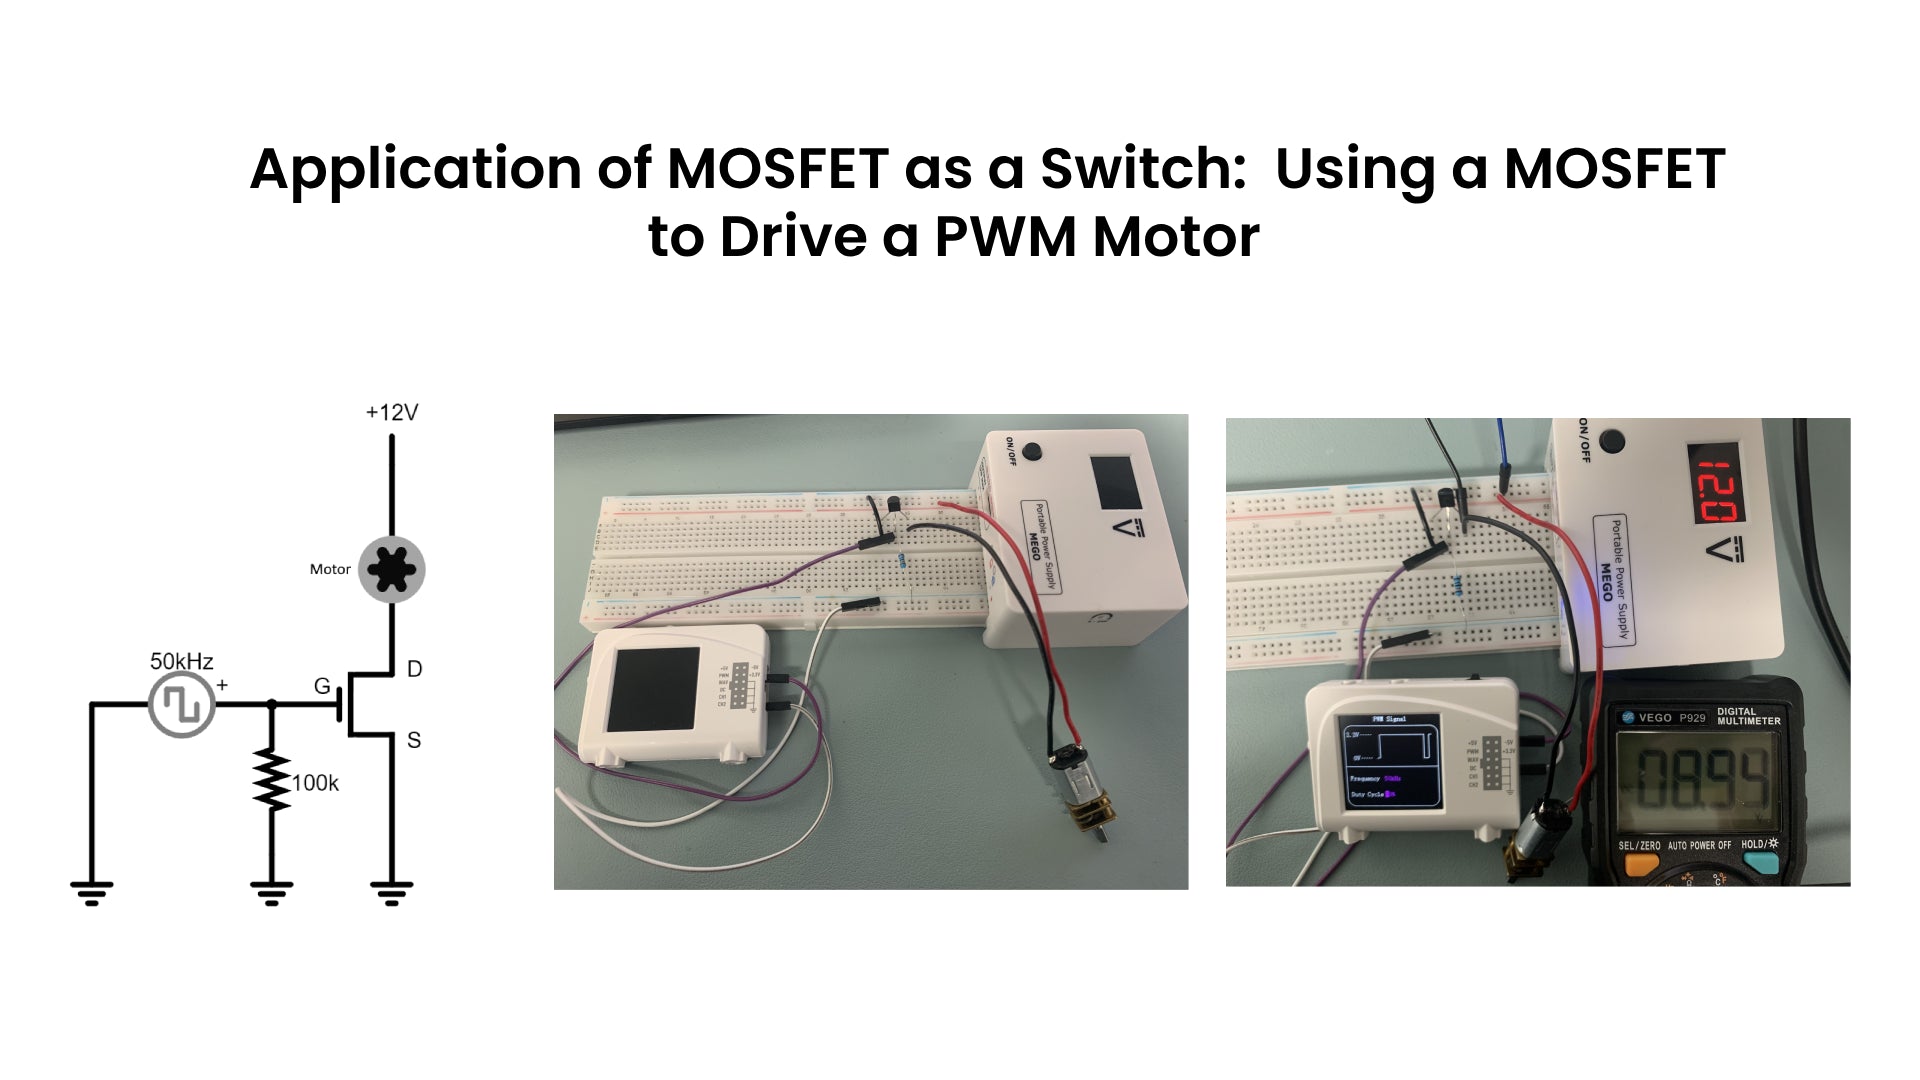 Application of MOSFET as a Switch:  Using a MOSFET to Drive a PWM Motor